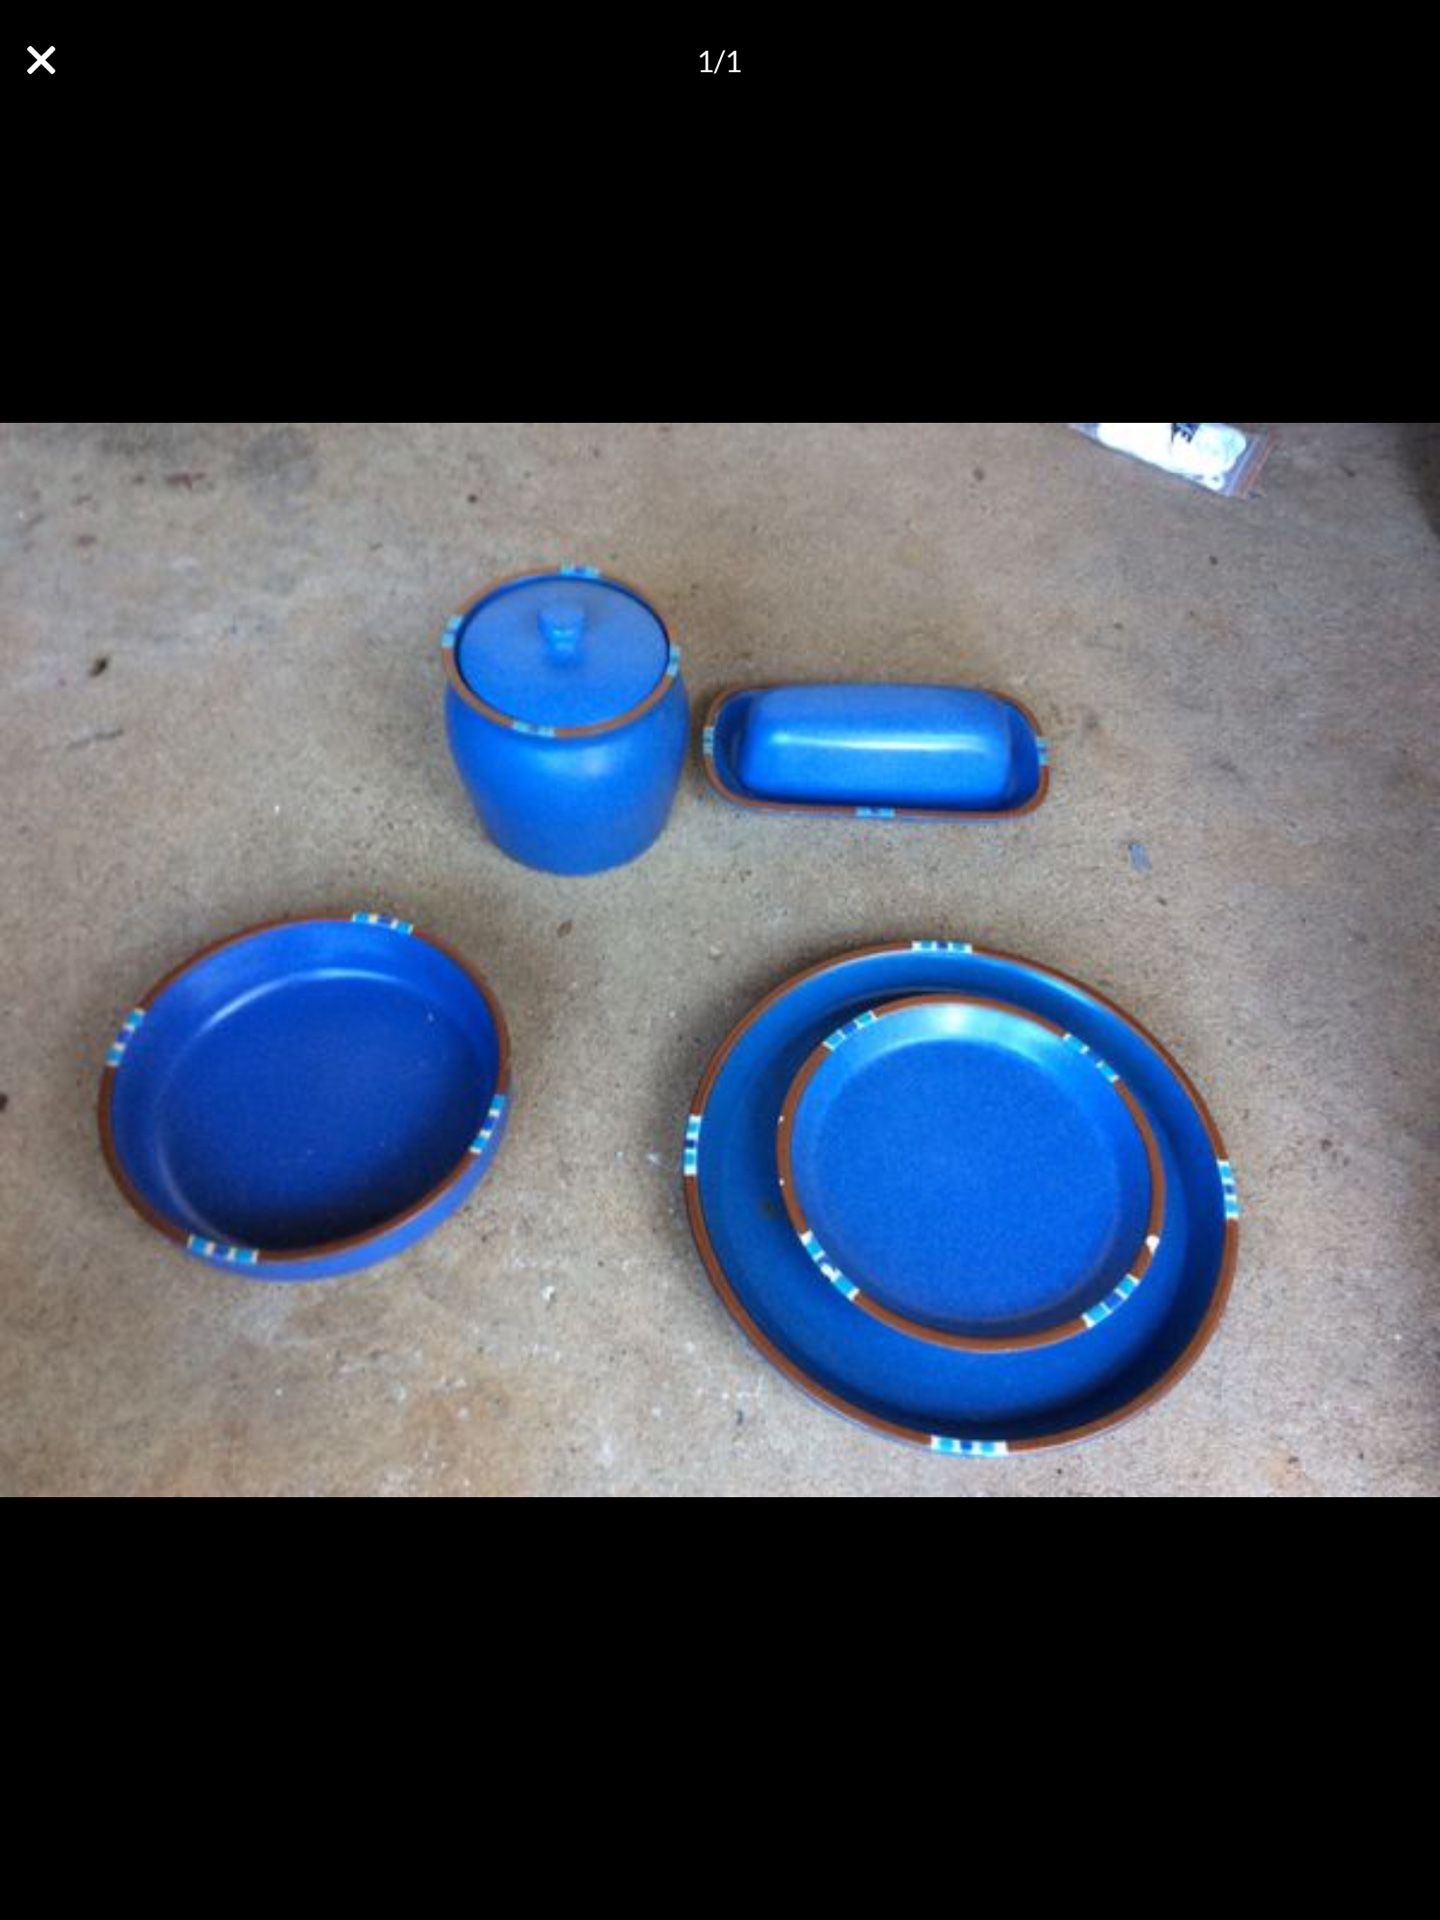 Dish set. Over 25 matching bowls, plates etc. CLEAN and FREE